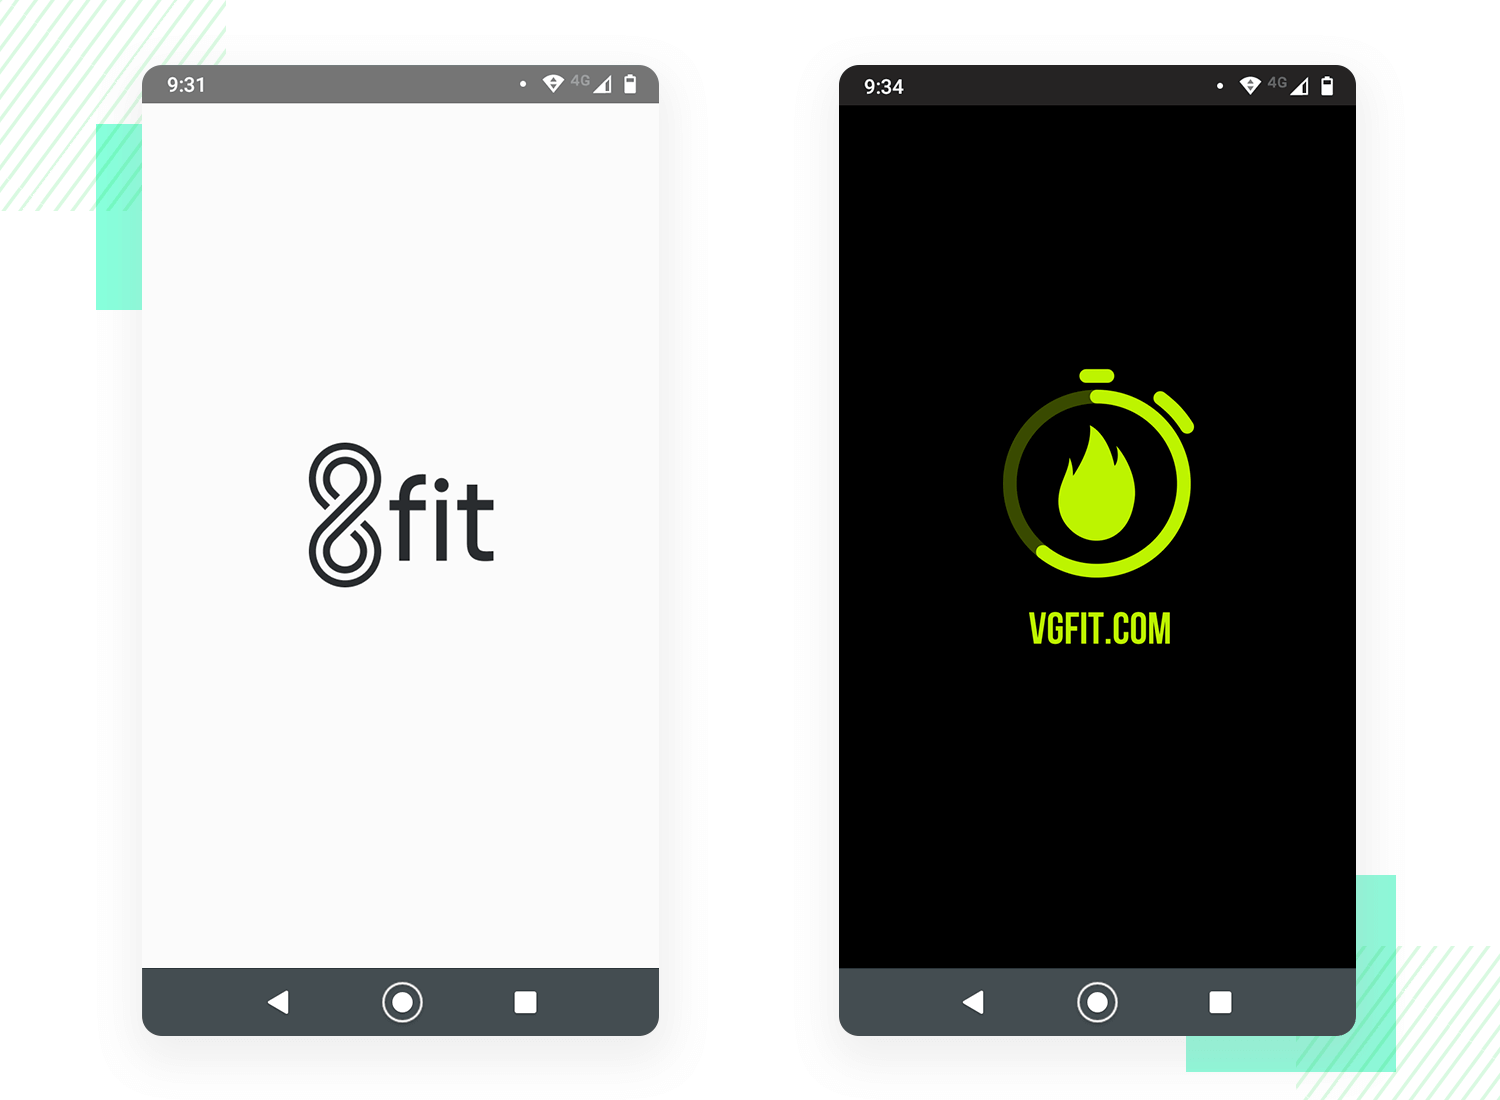 splash screens by fitness apps - 8fit and vg-fit